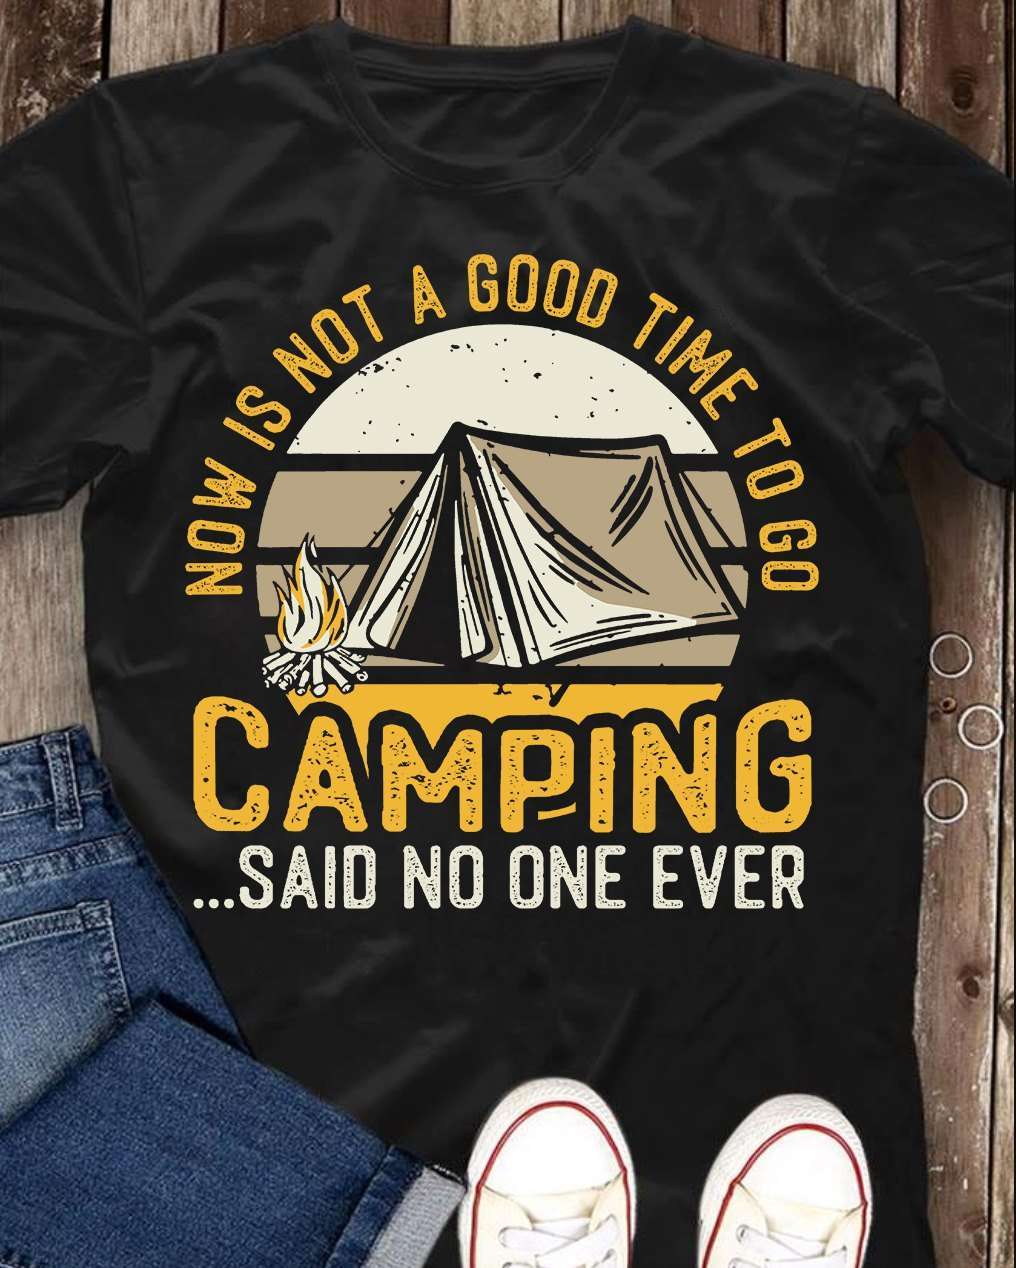 Now is not a good time to go camping said no one ever